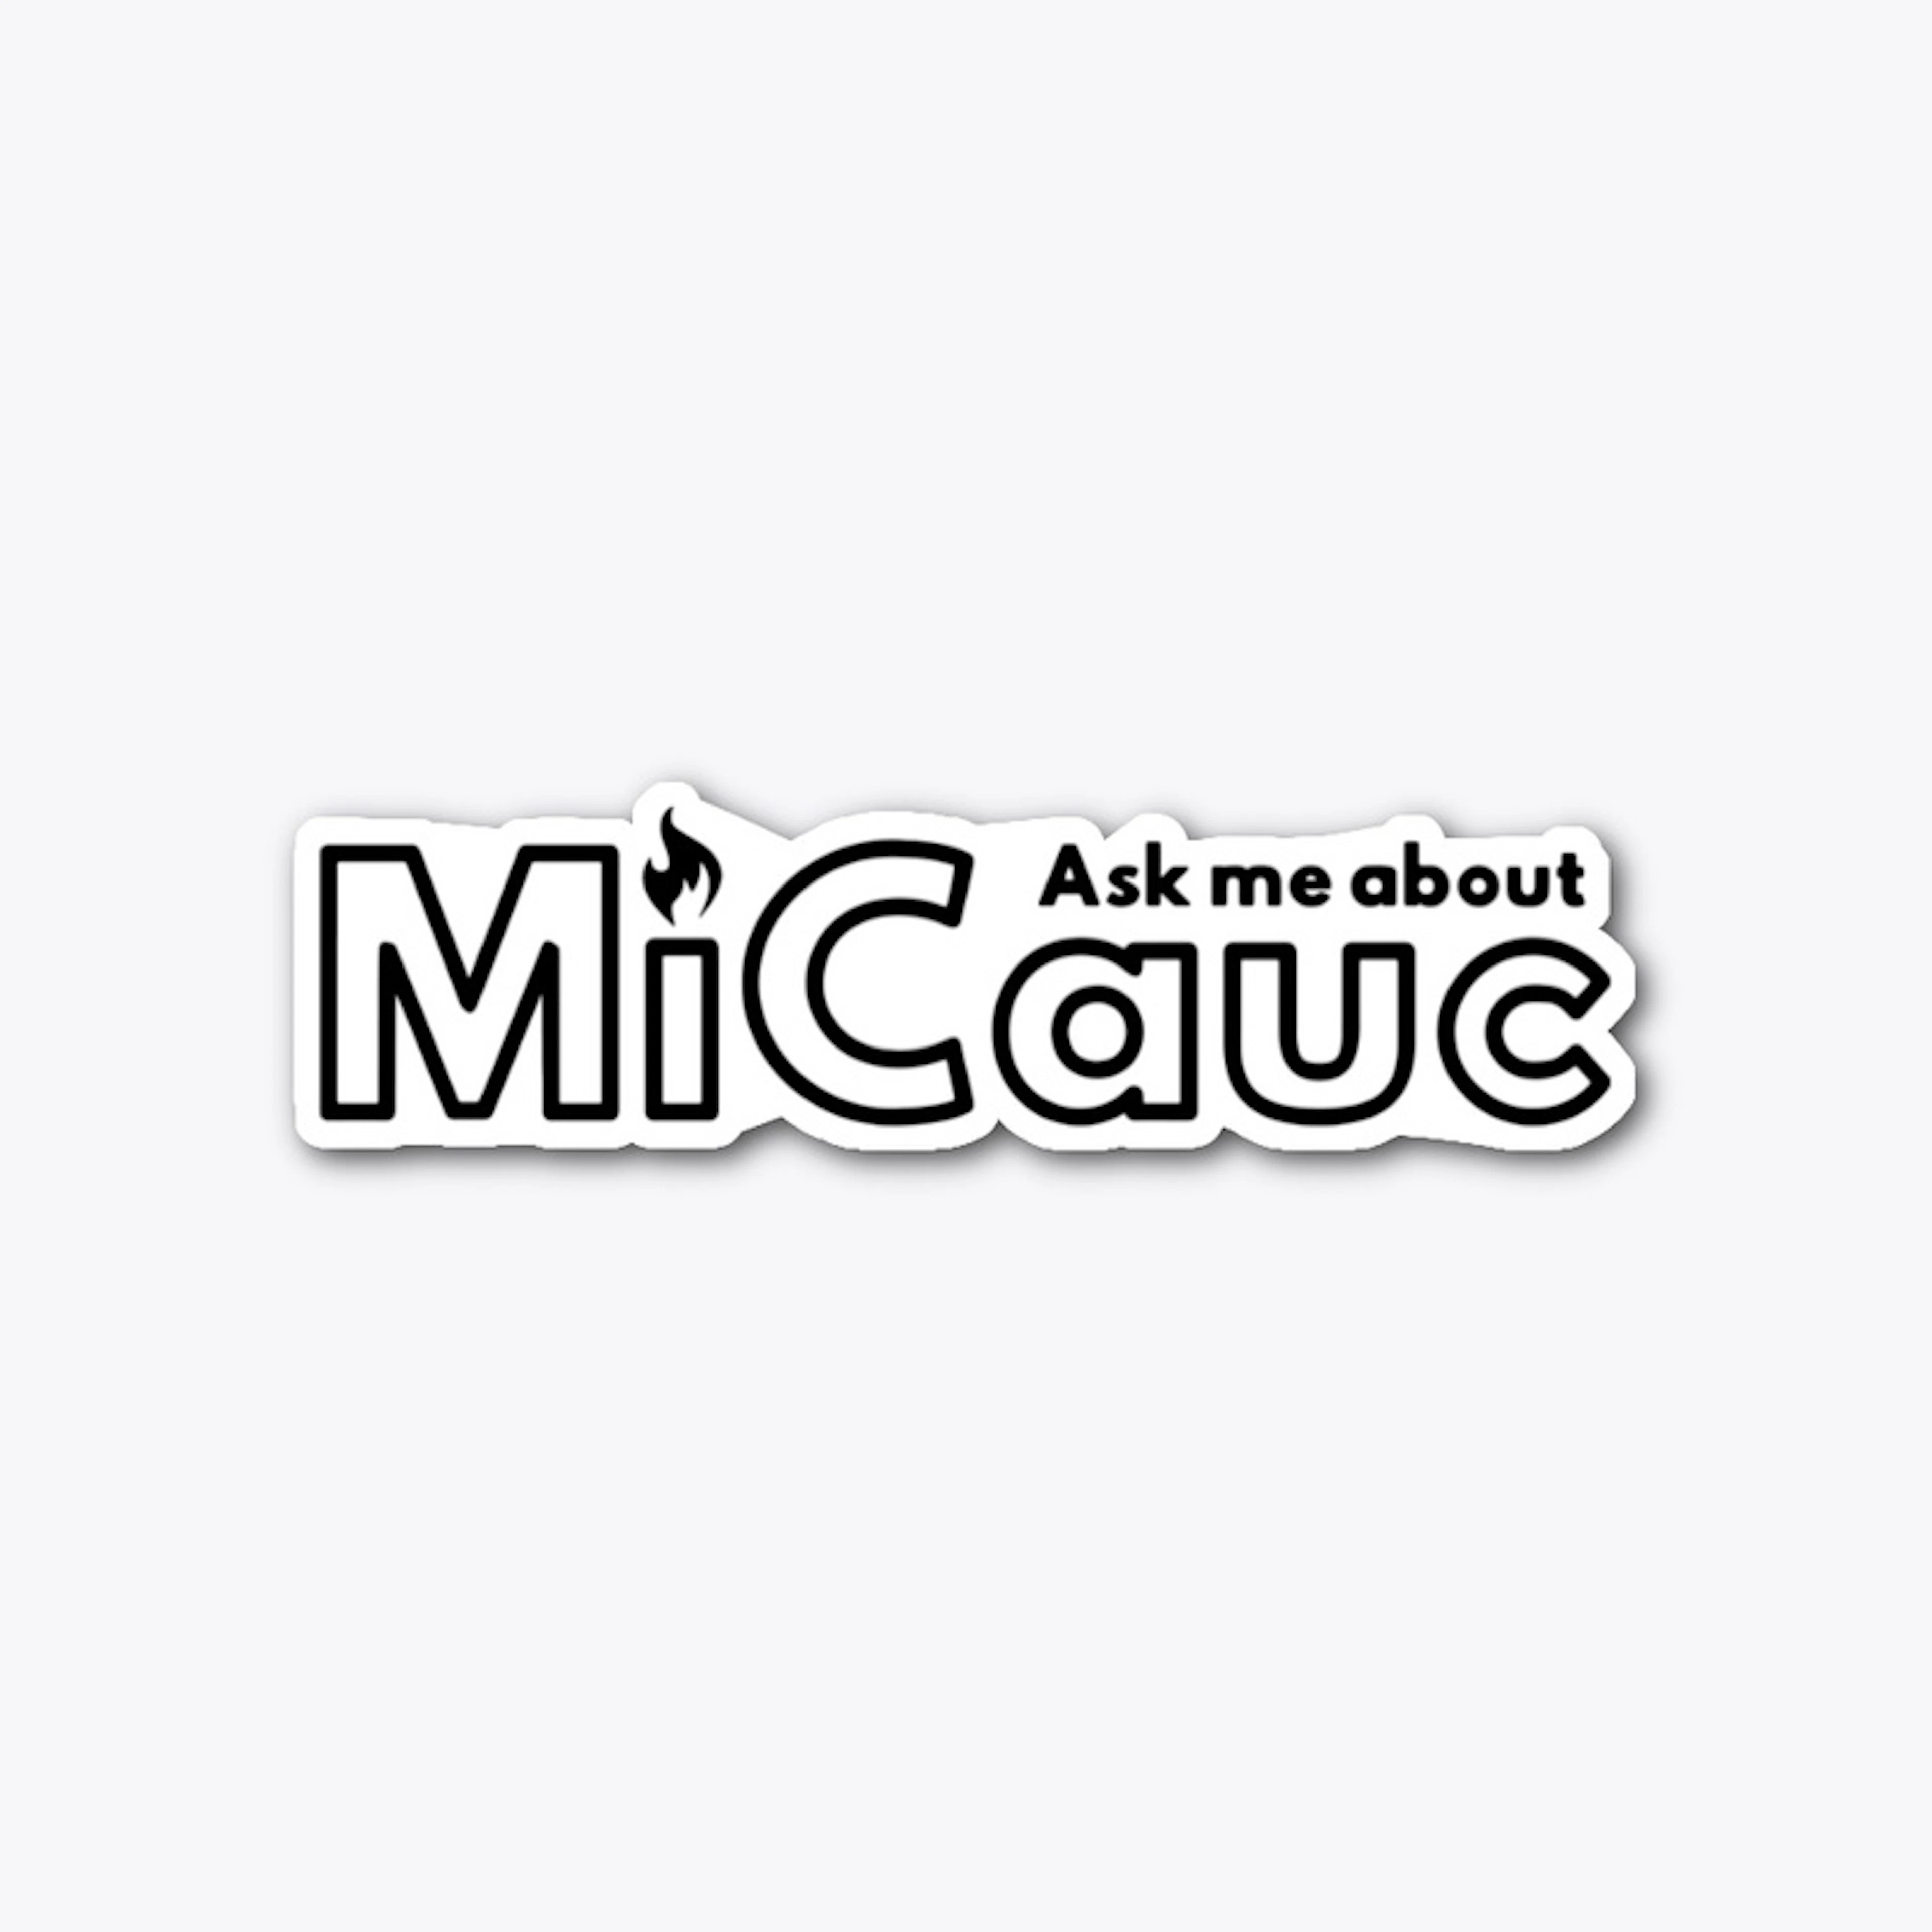 Ask me about MiCauc